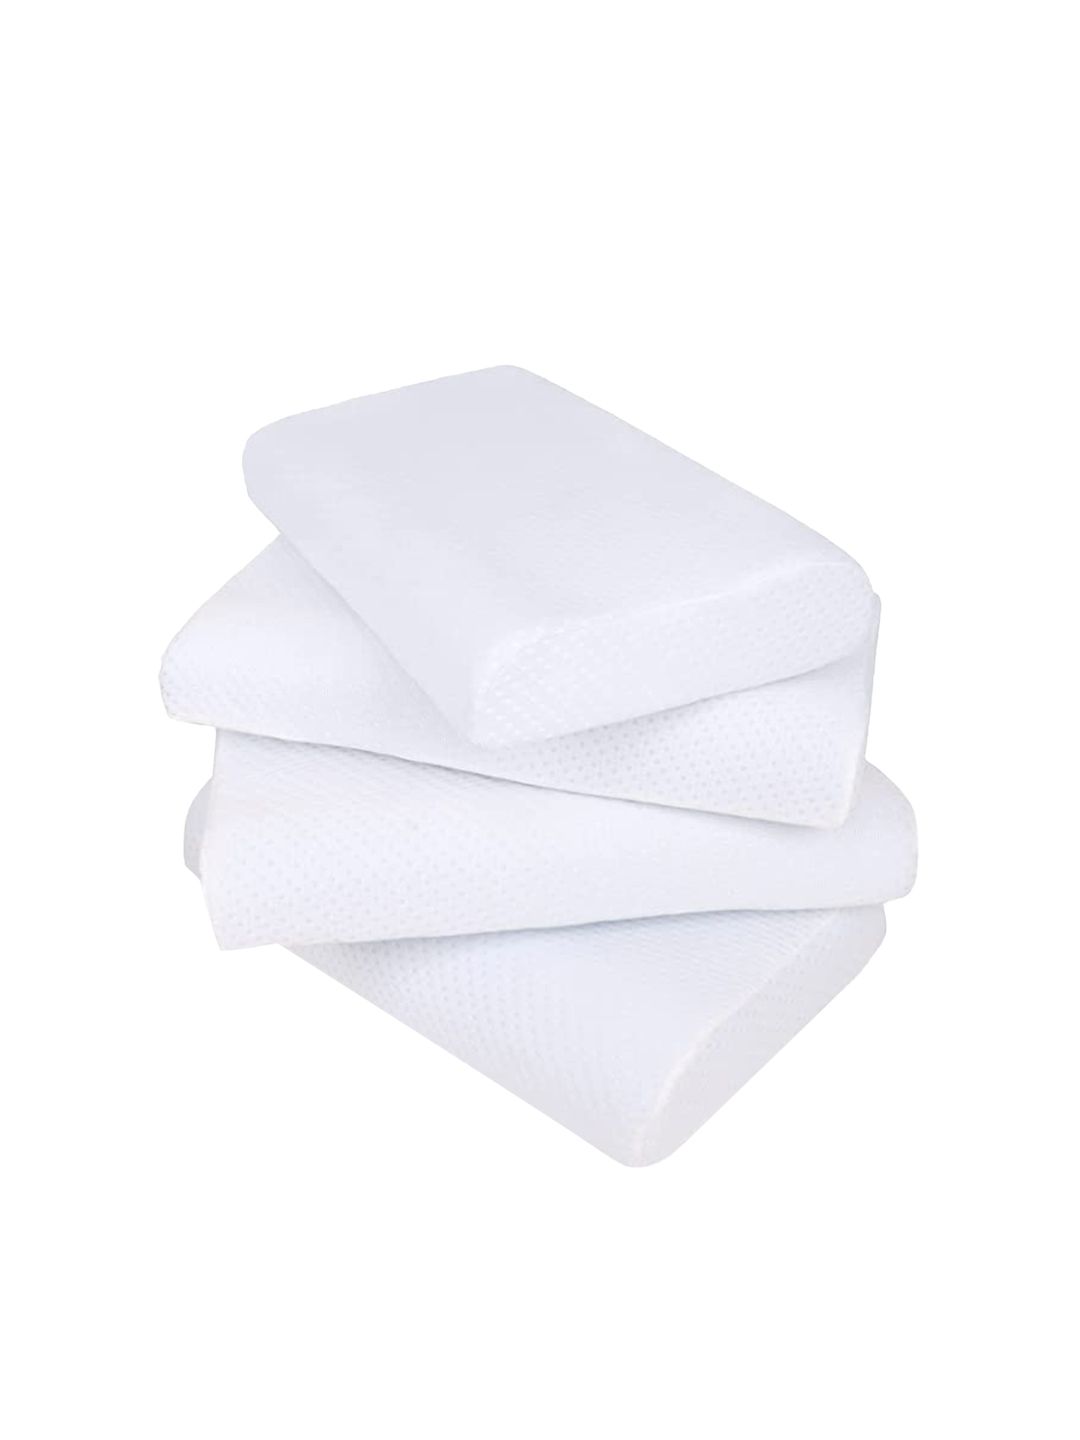 Sleepsia Set of 3 White Solid Memory Foam Soft Bed Pillow Price in India